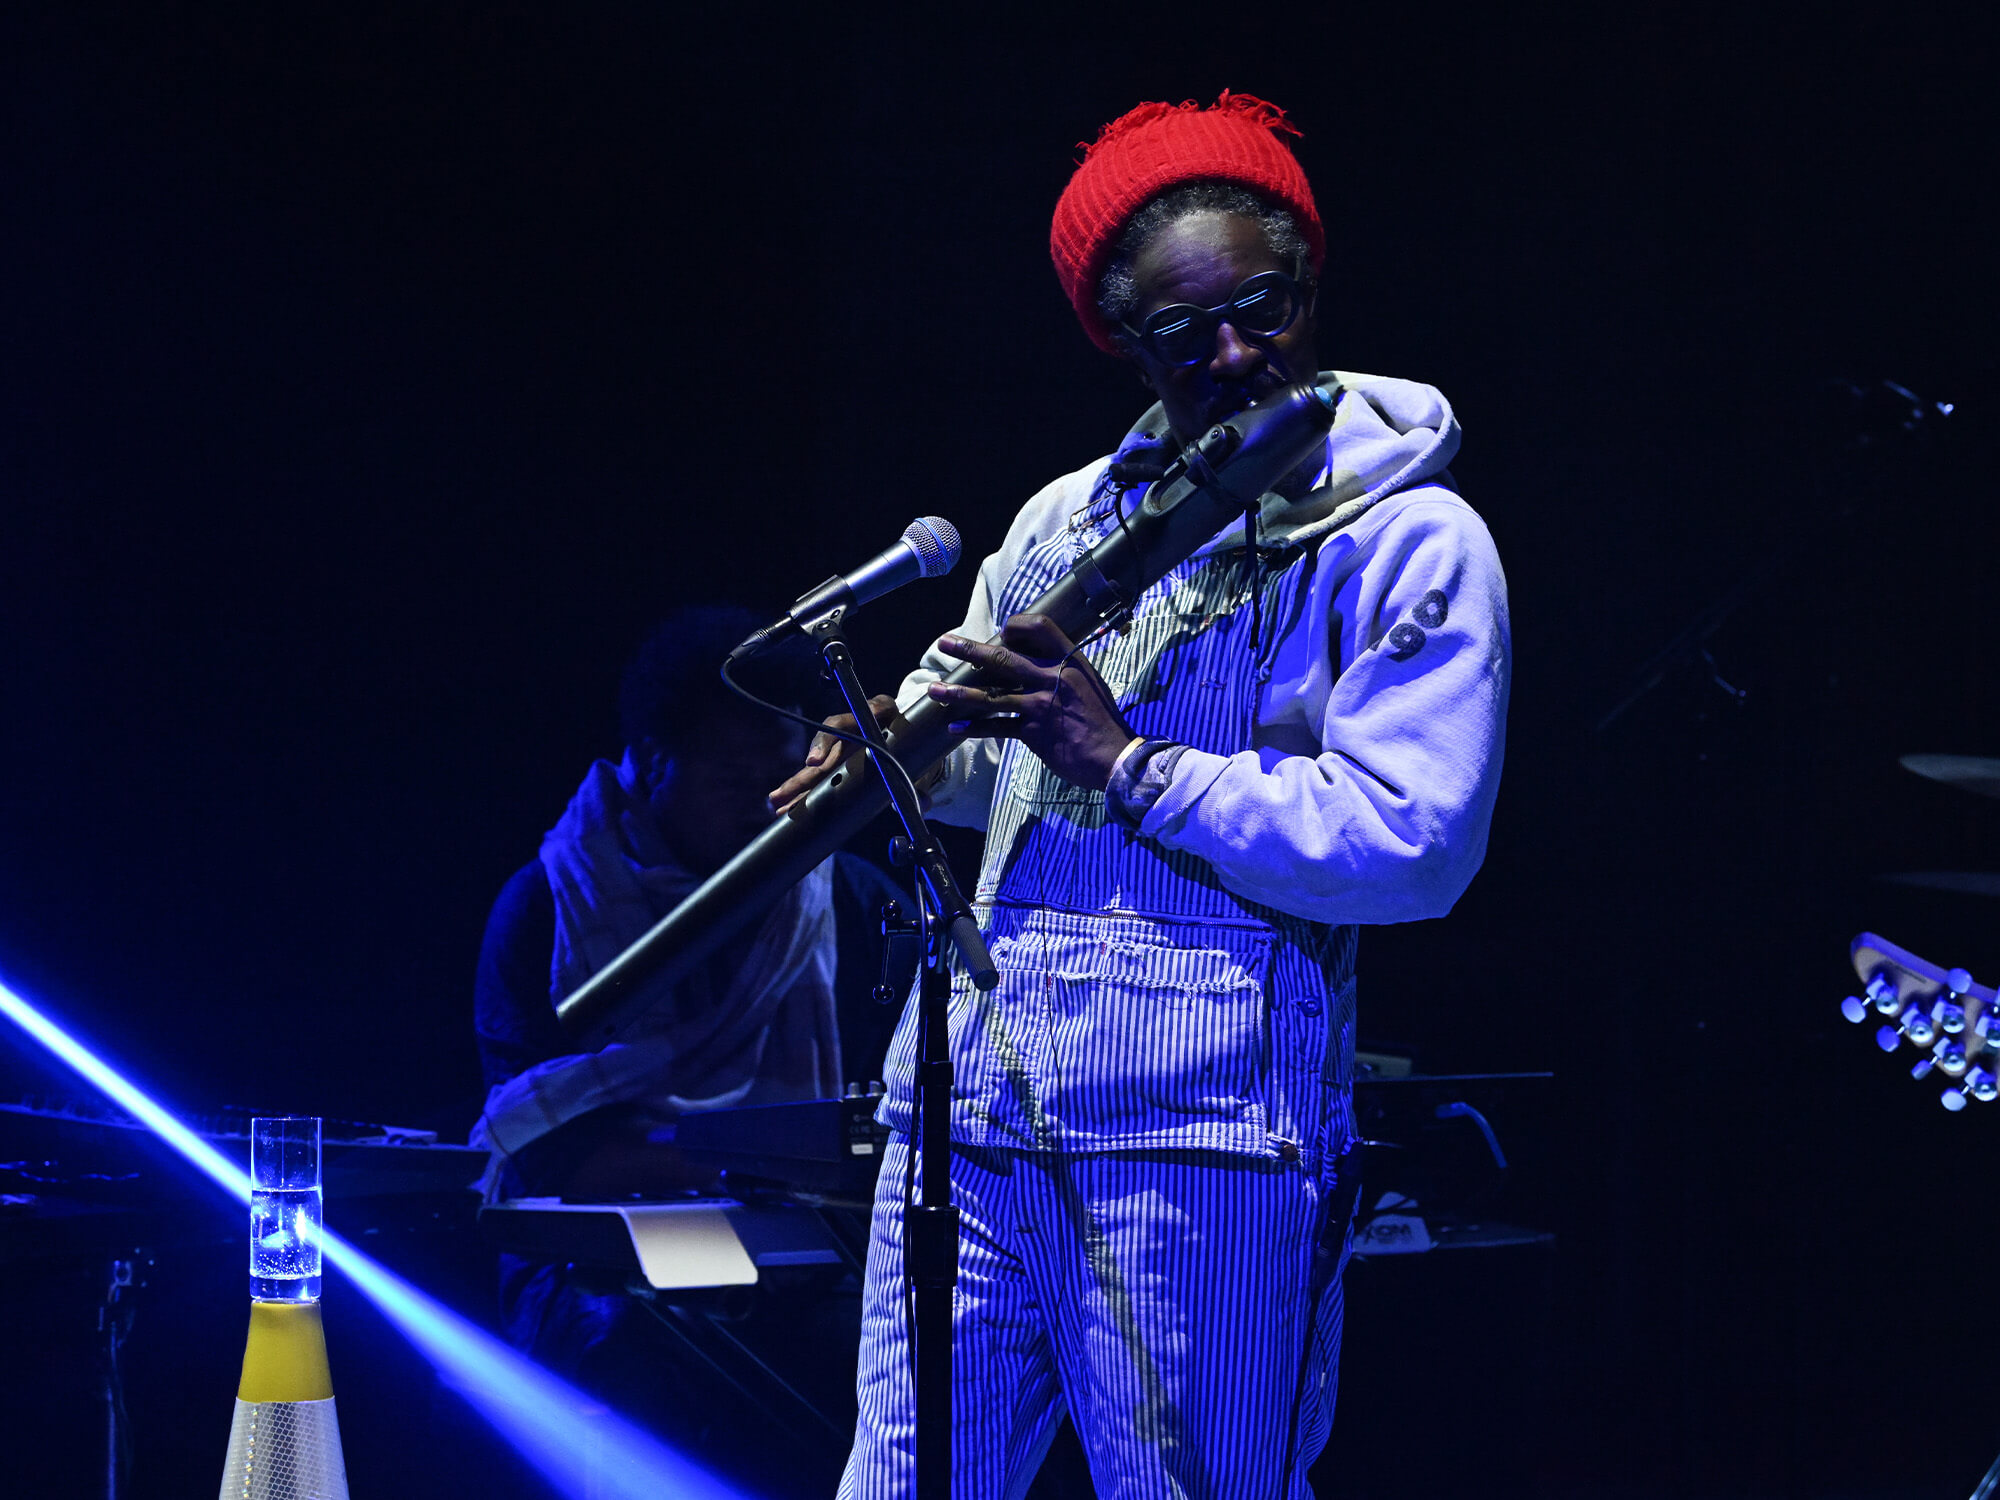 Andre 3000 on stage. He is playing a woodwind instrument.